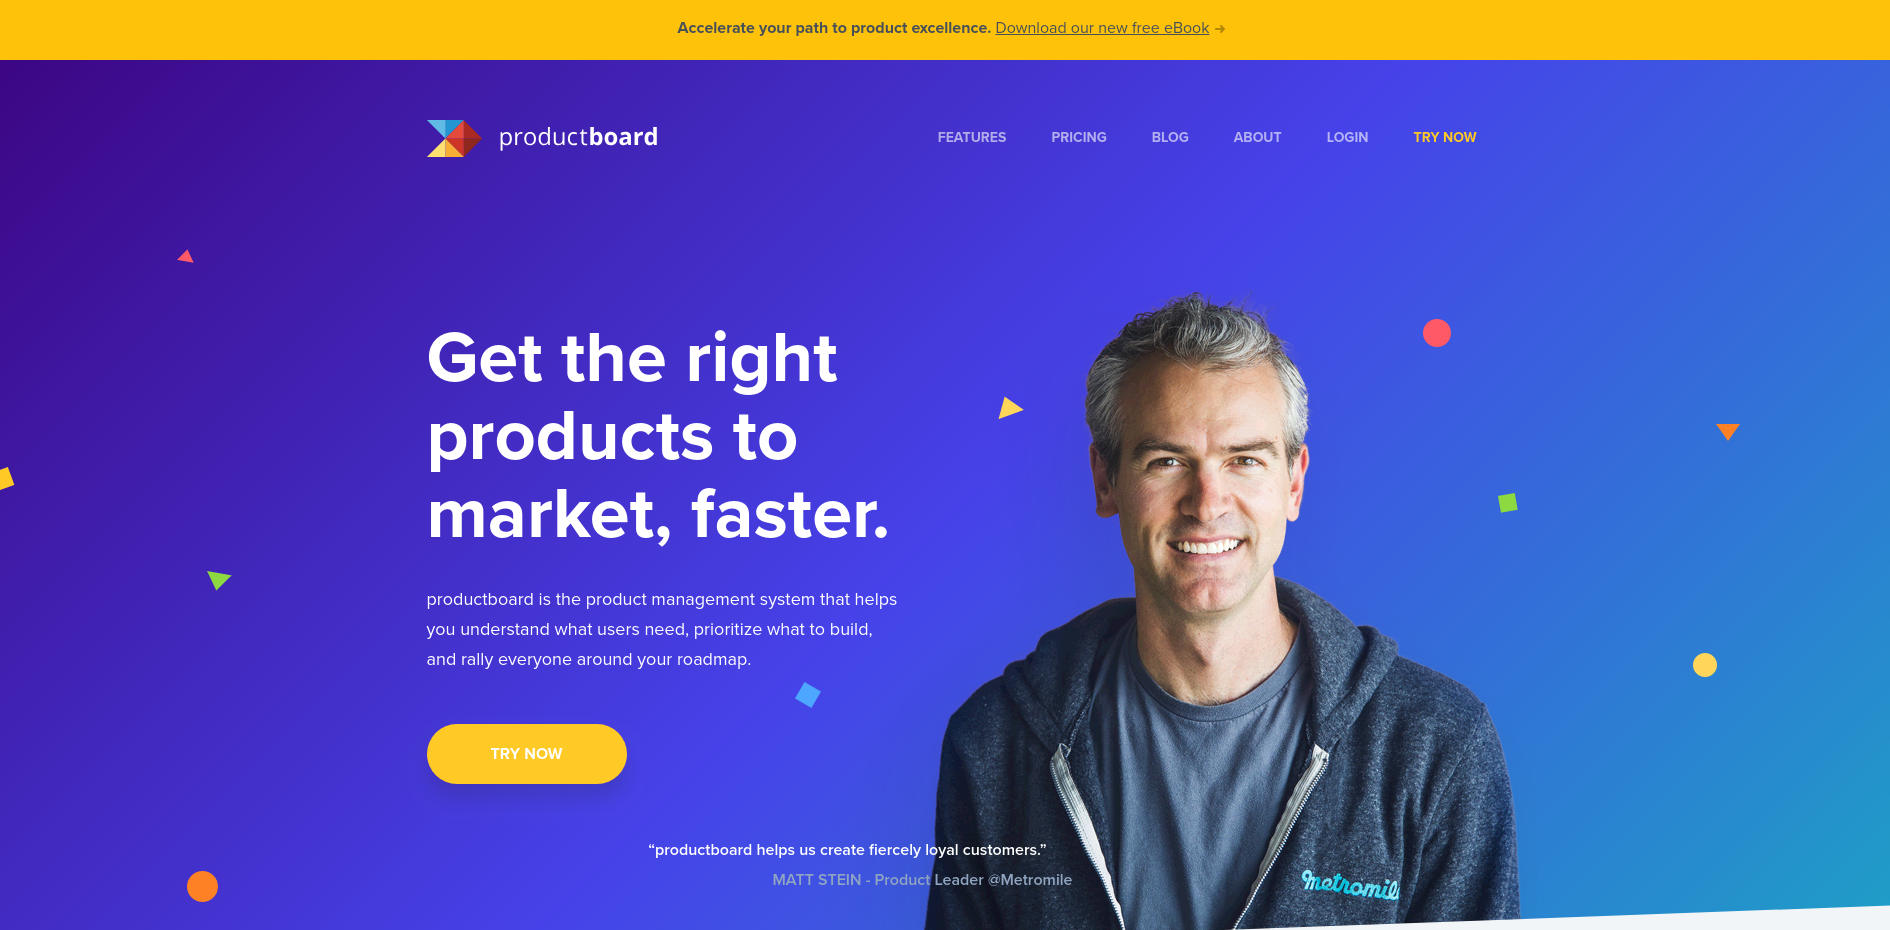 productboard product marketing tool landing page